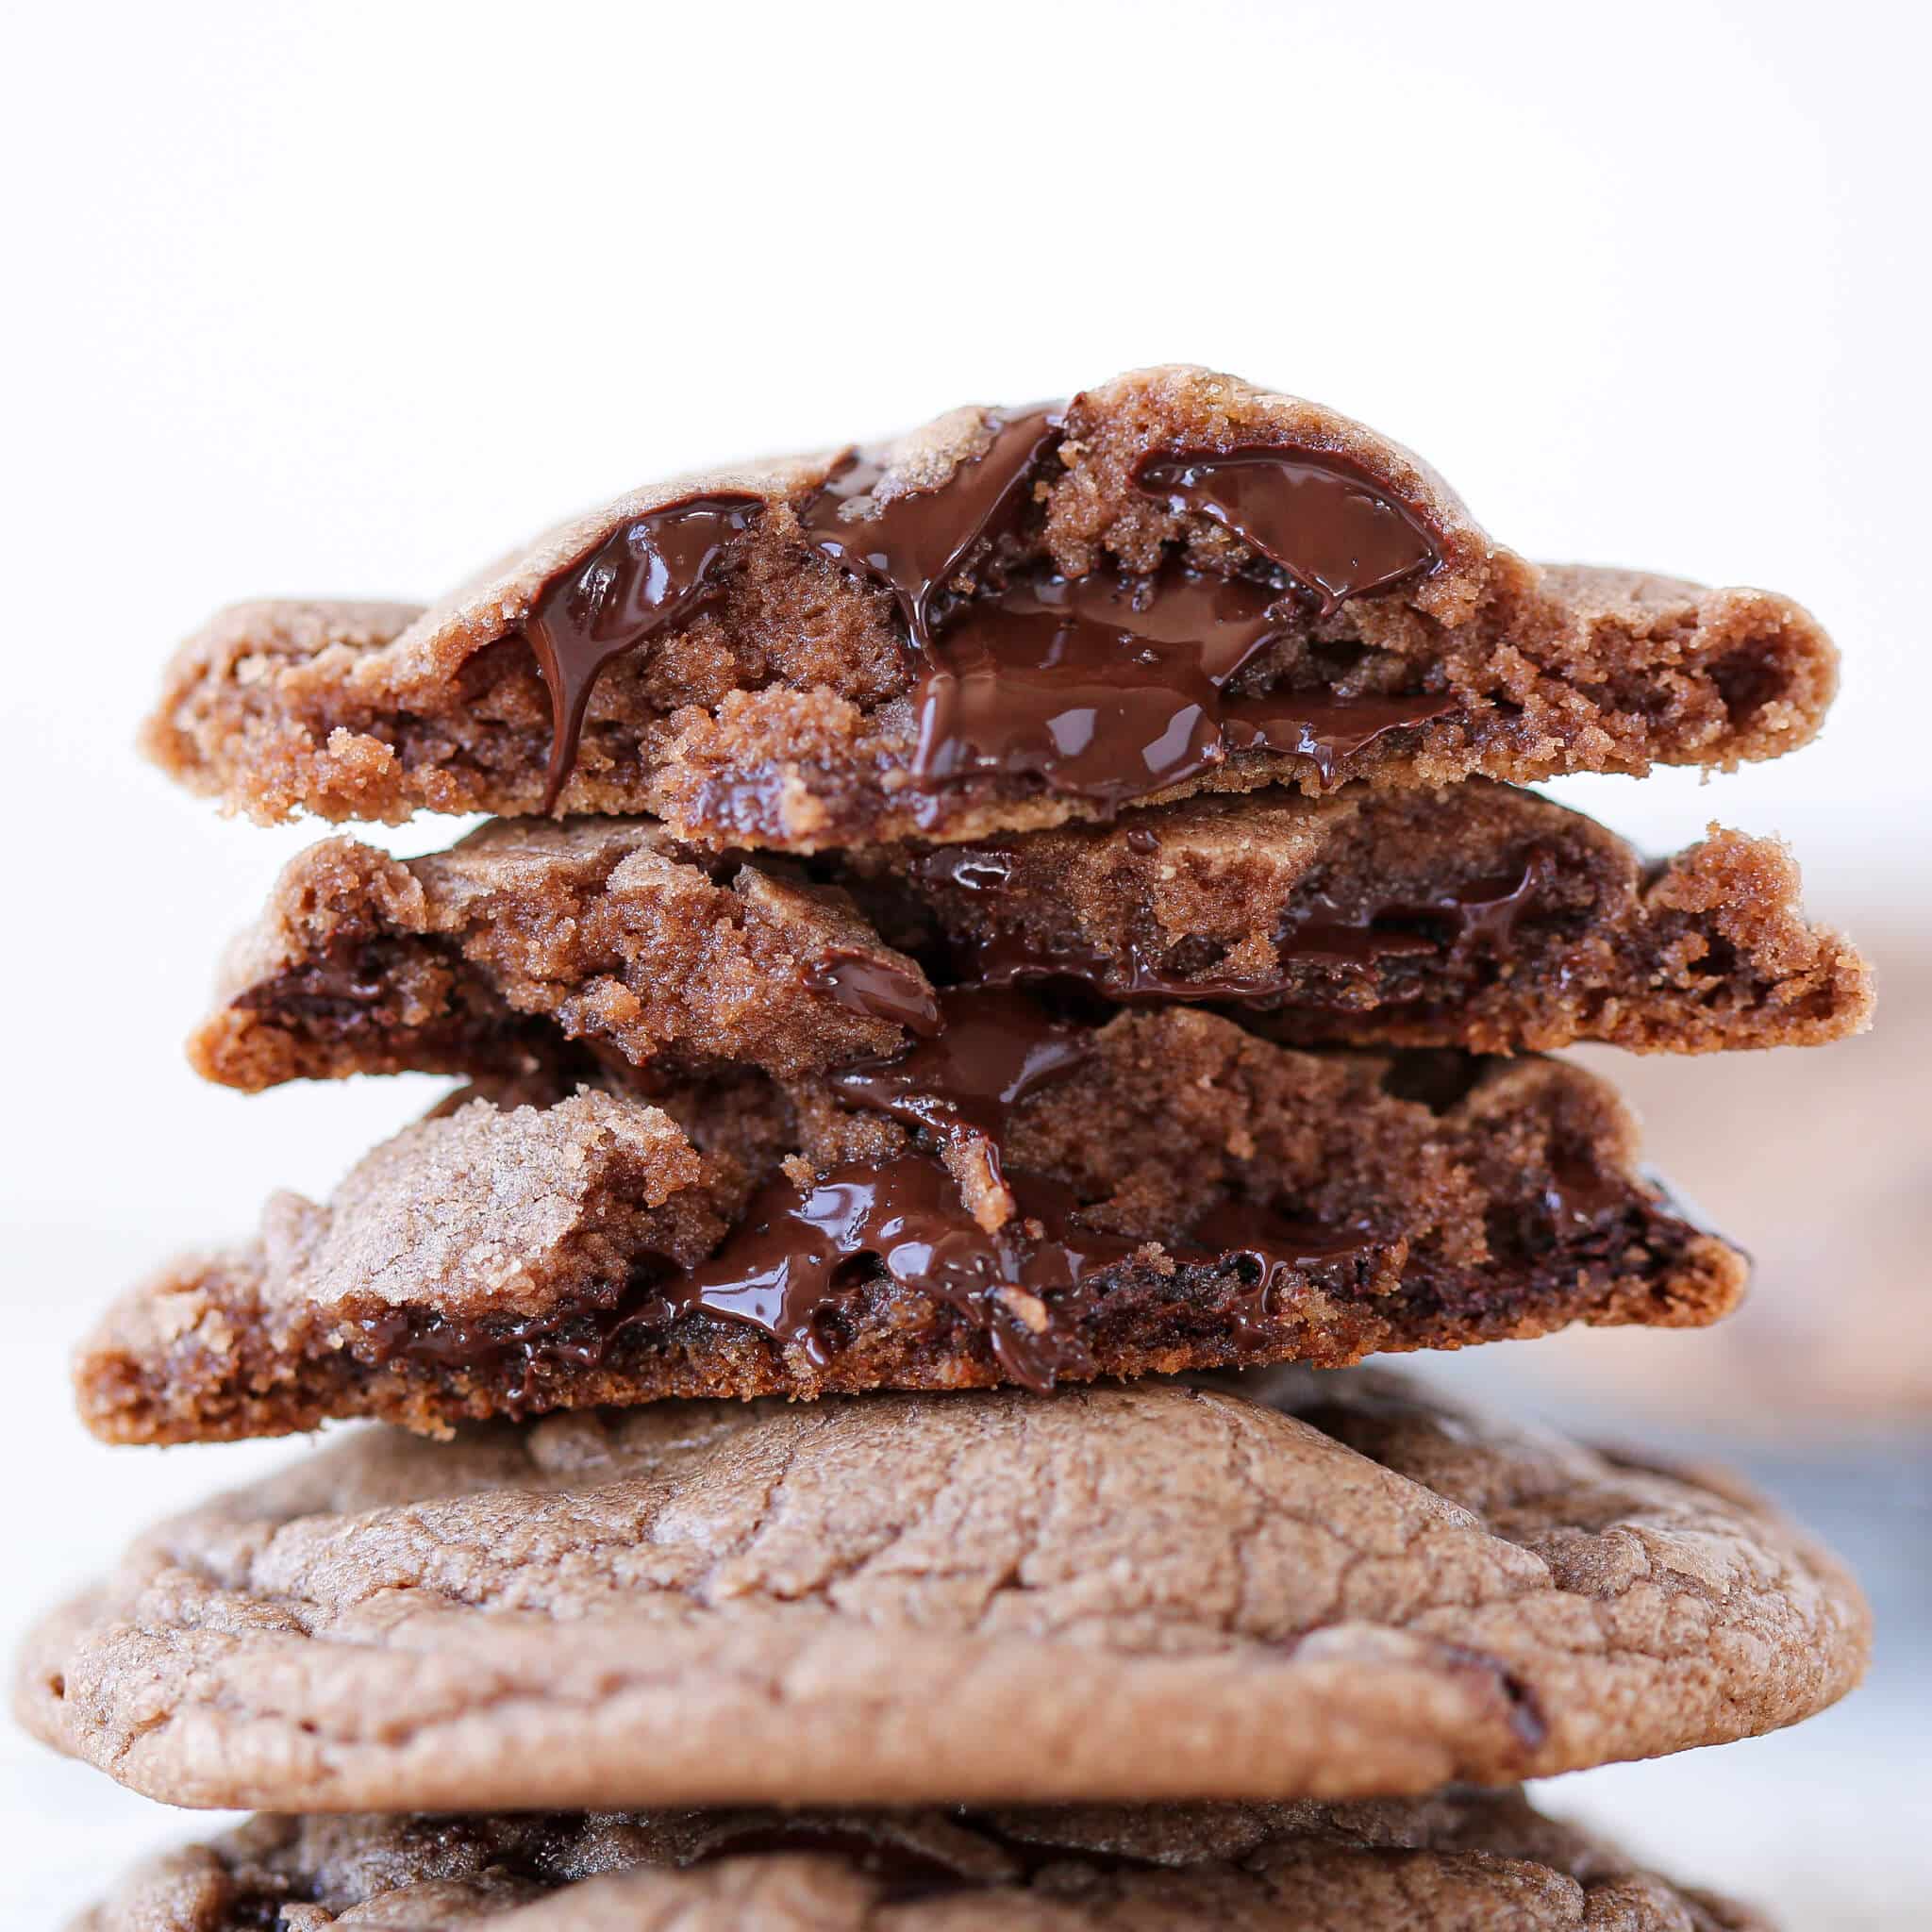 Nutella Chocolate Chip Cookies interior texture detailed